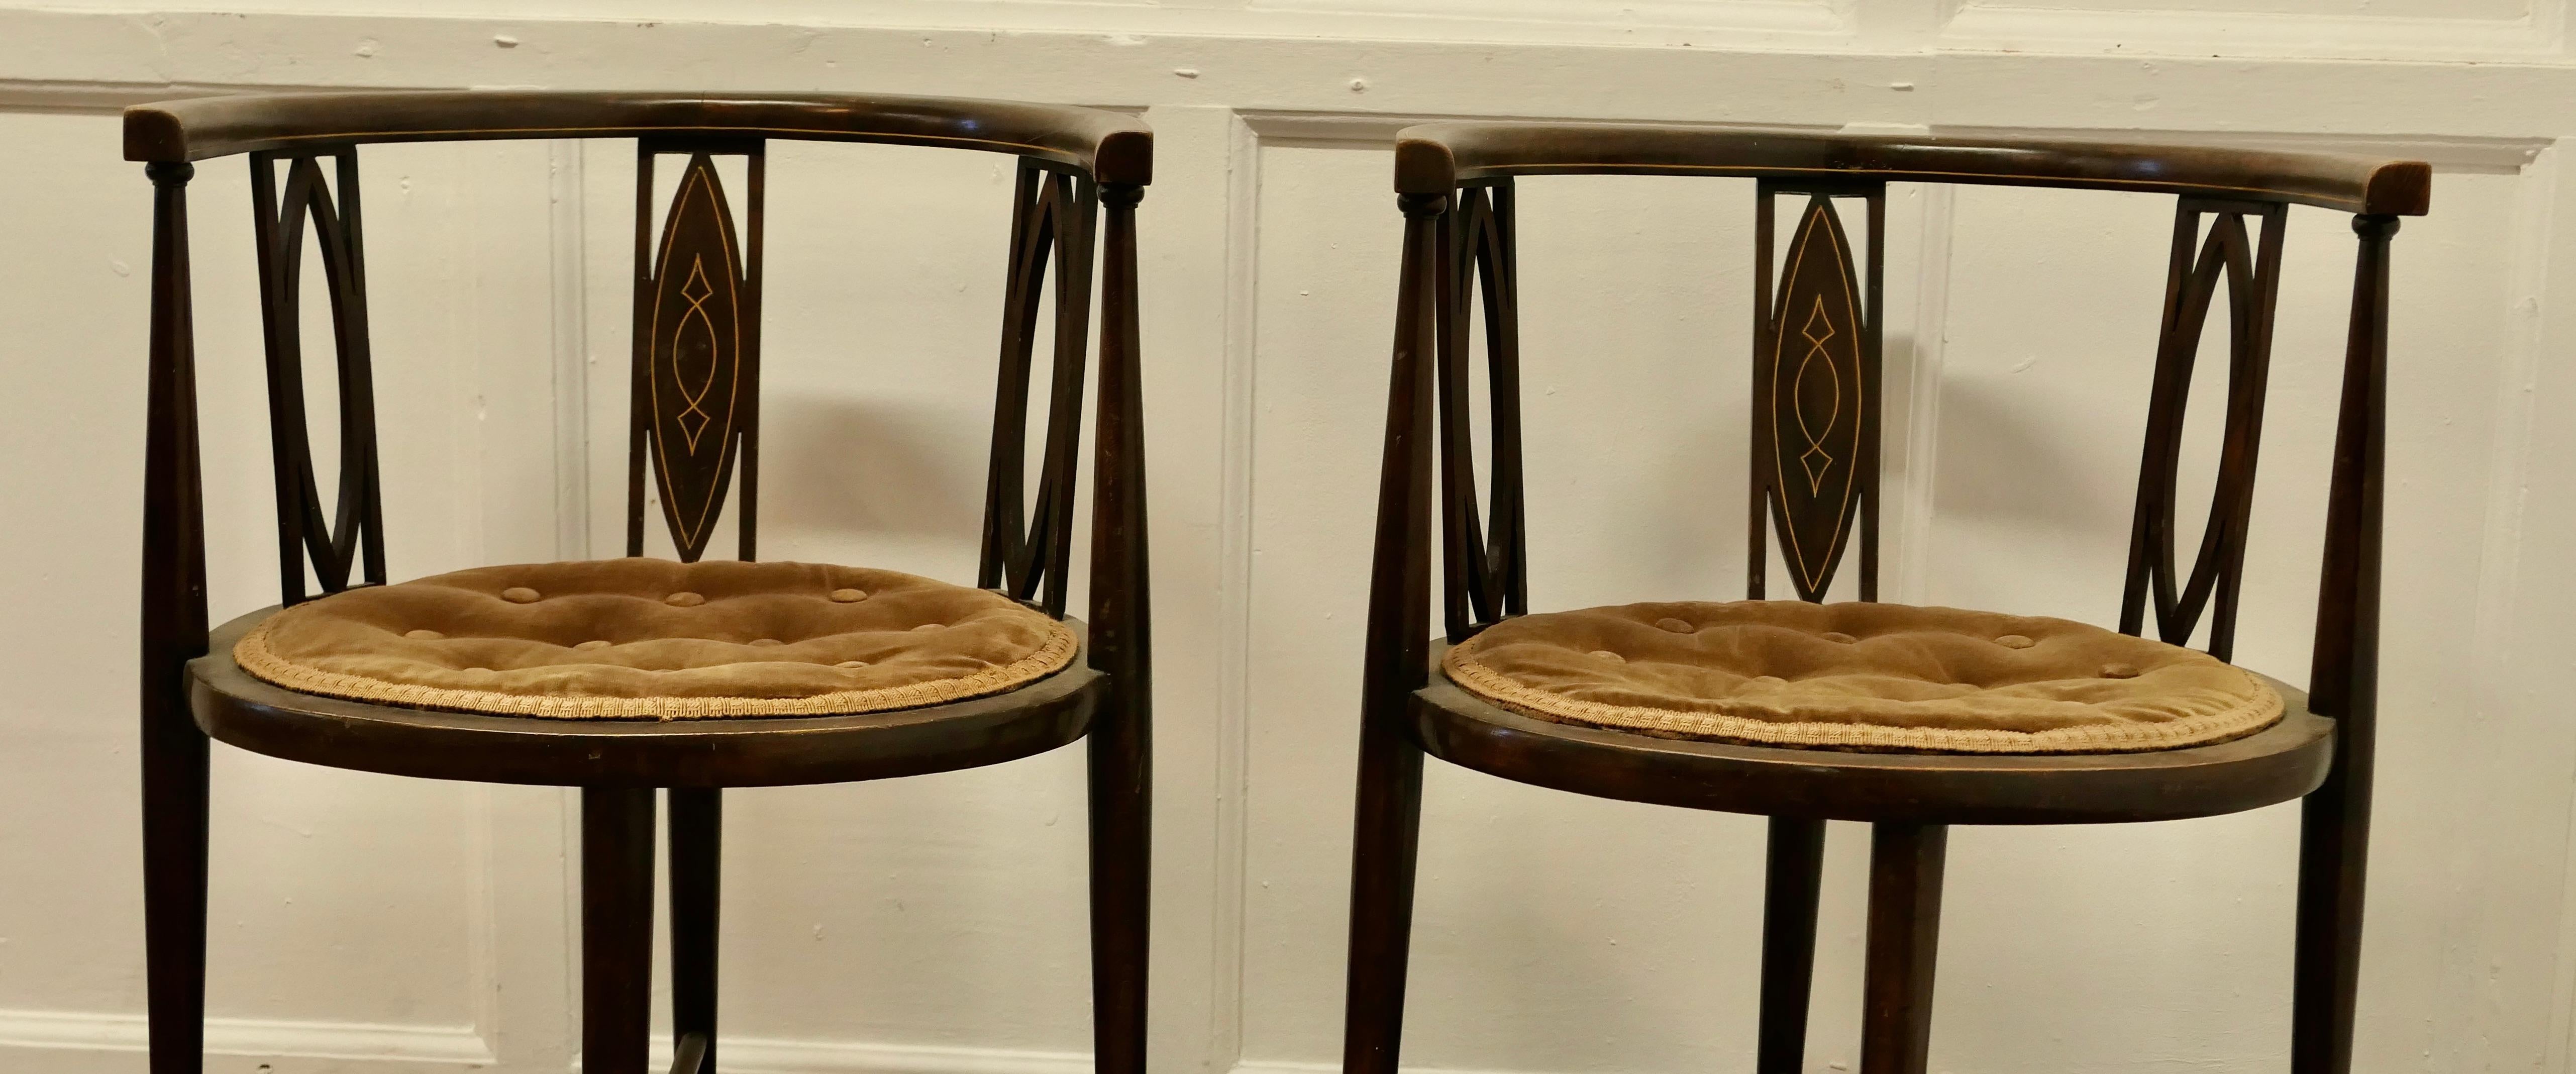 Early 20th Century Pair of Edwardian Circular Arm Chairs For Sale